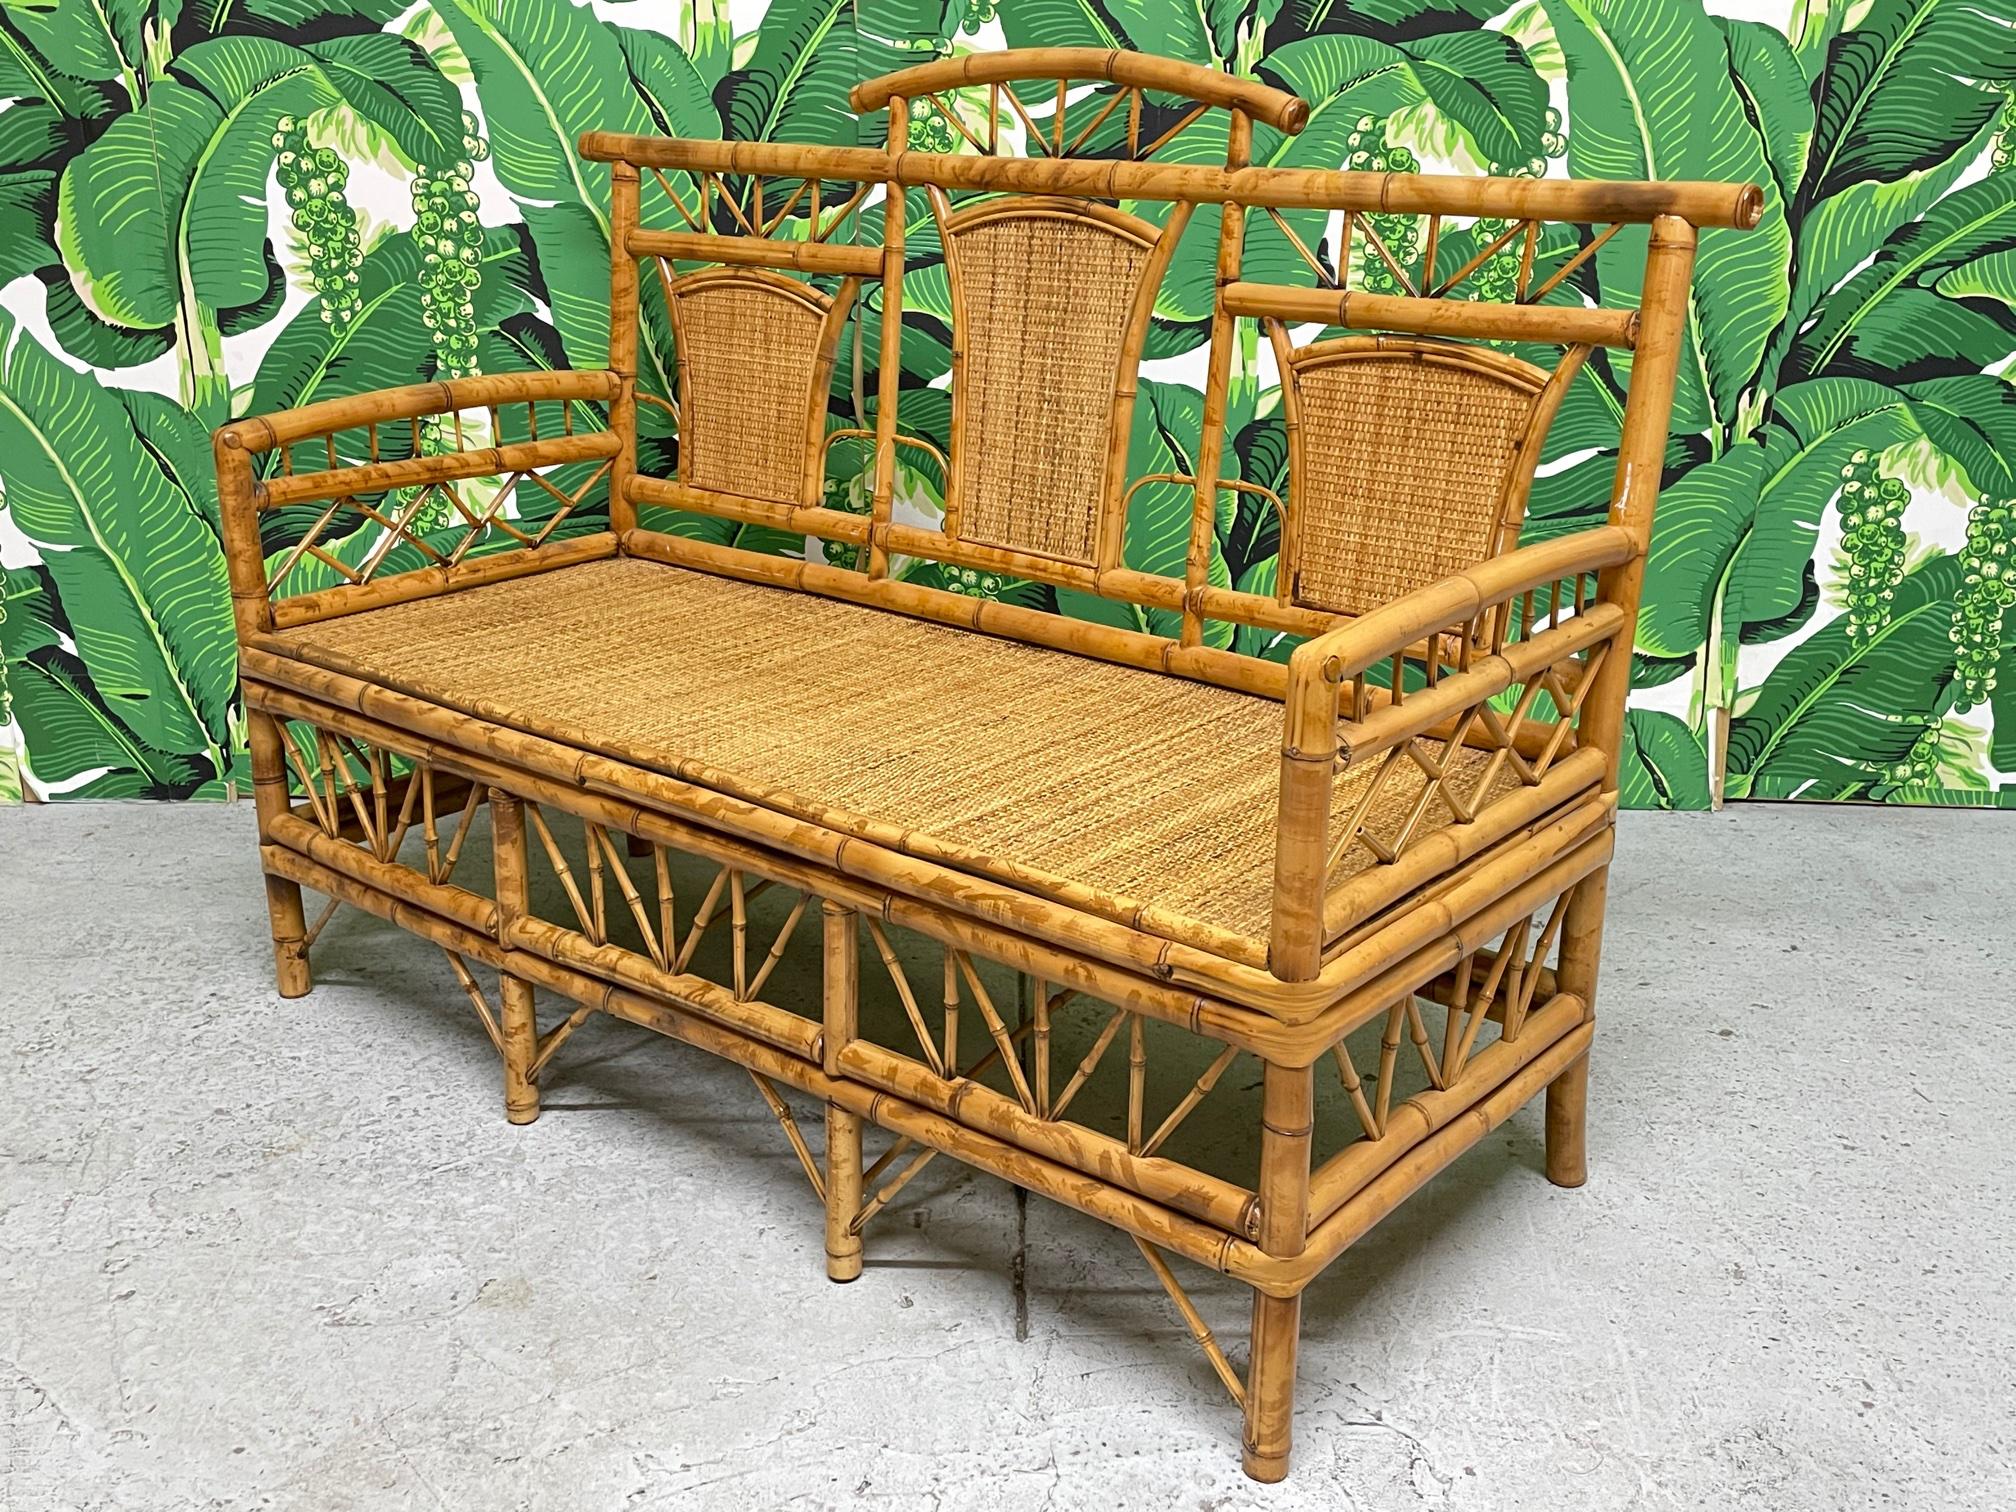 Vintage bamboo bench features an Asian chinoiserie design and woven wicker seat and back inserts. Very good condition with only minor imperfections consistent with age.
  
 